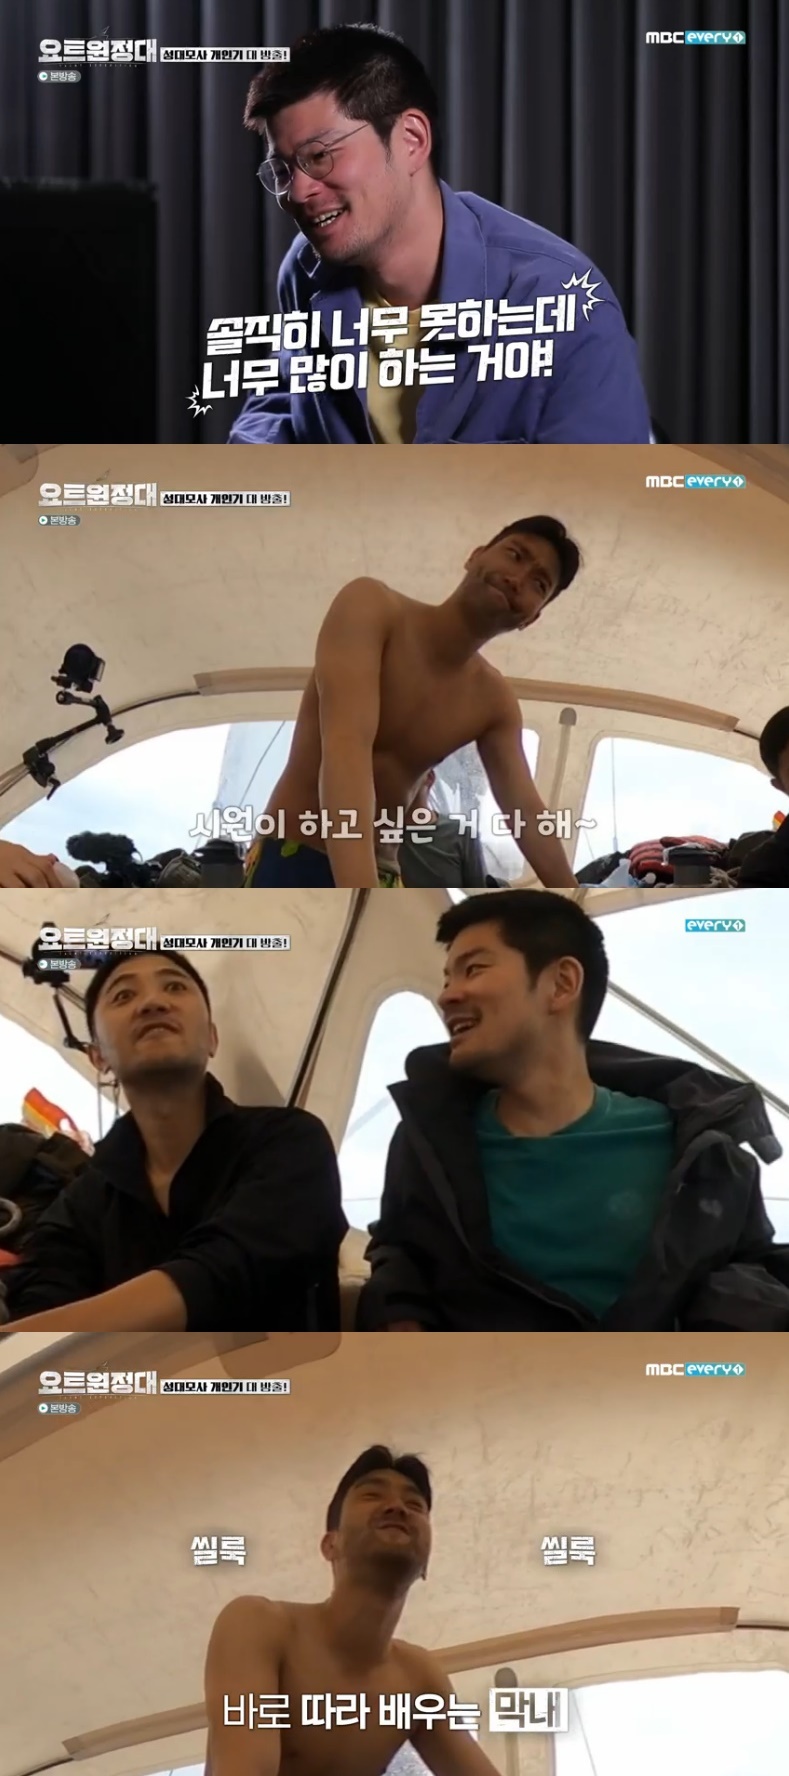 Choi Siwon released his personal period on the yacht in MBC Everlon entertainment program Yot Expedition broadcasted on the afternoon of the 5th, especially giving a big smile to the actors such as Lee Kyung-young.Chang Kiha said in an interview with the production team, I honestly can not do too much, but I do too much.Ive been lying down to sleep and keep going, he recalled.Chang Kiha said, (Choi Siwon) is trying to be recognized as if it is not similar, but it is so funny and cute.Choi Siwon then even offered a greedy (?) to the actor Han Suk-kyu vocal imitation.When Jingu followed Han Suk-kyus voice properly, Choi Siwon, who was next to him, immediately caught up with the feature and started to follow it, giving another laugh.